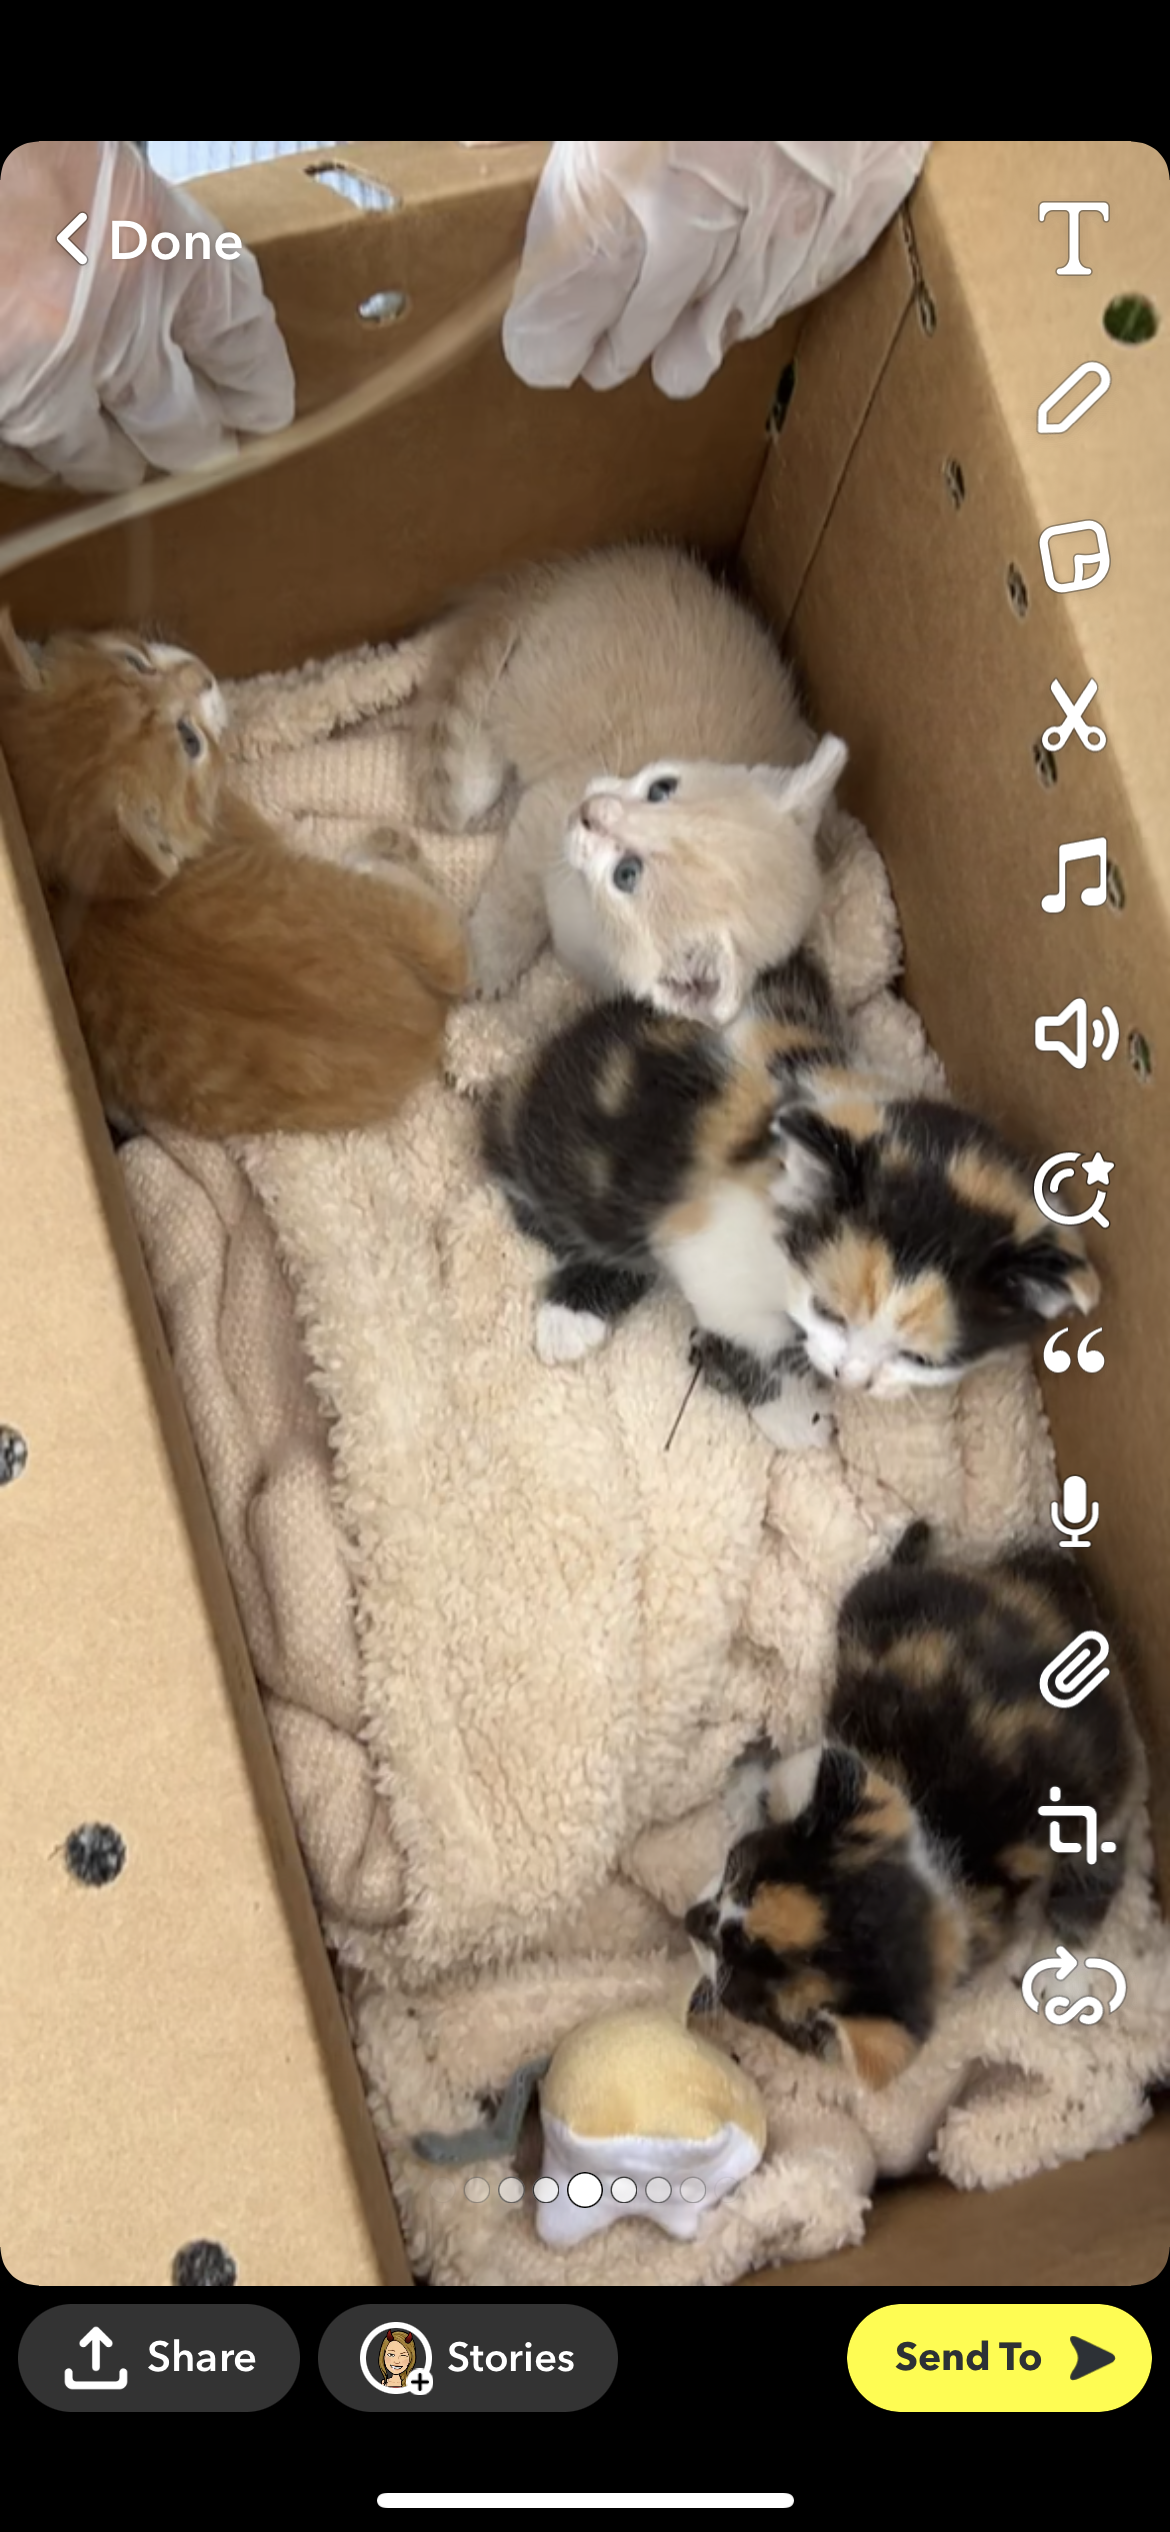 a picture of no names given they are found abandoned in a bush a cat that needs a foster home.